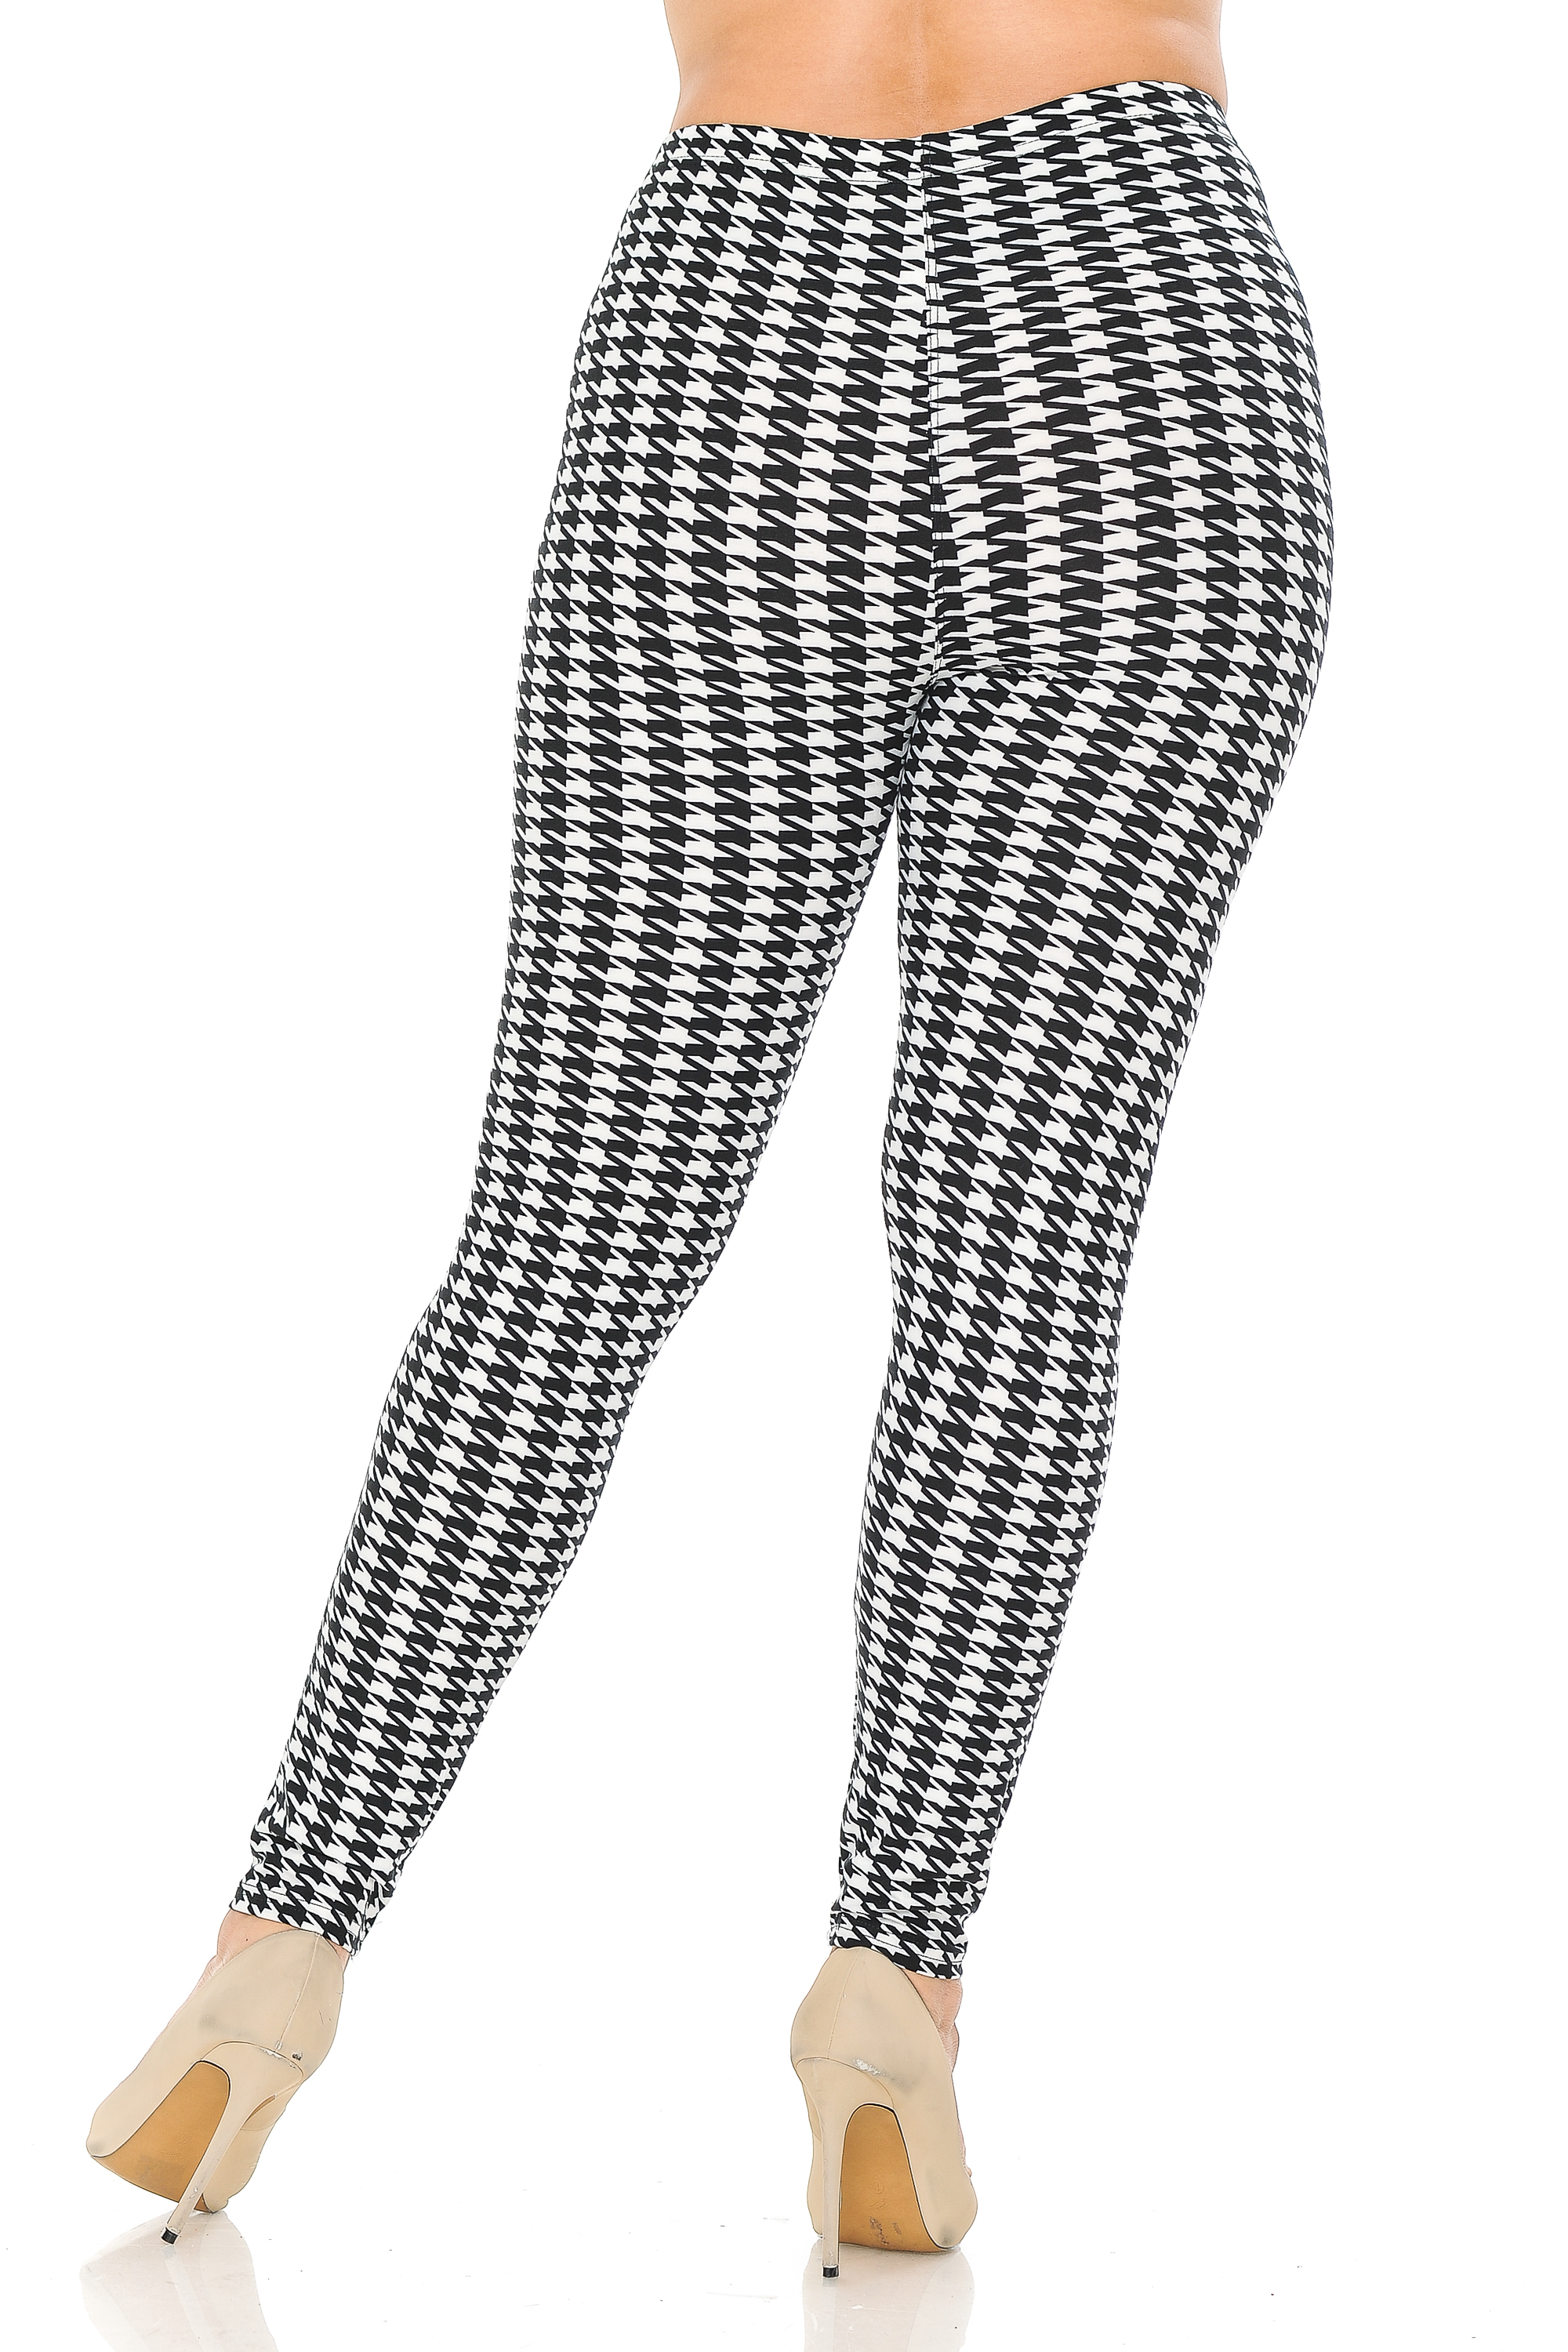 Wholesale Buttery Smooth Black and White Houndstooth Plus Size Leggings